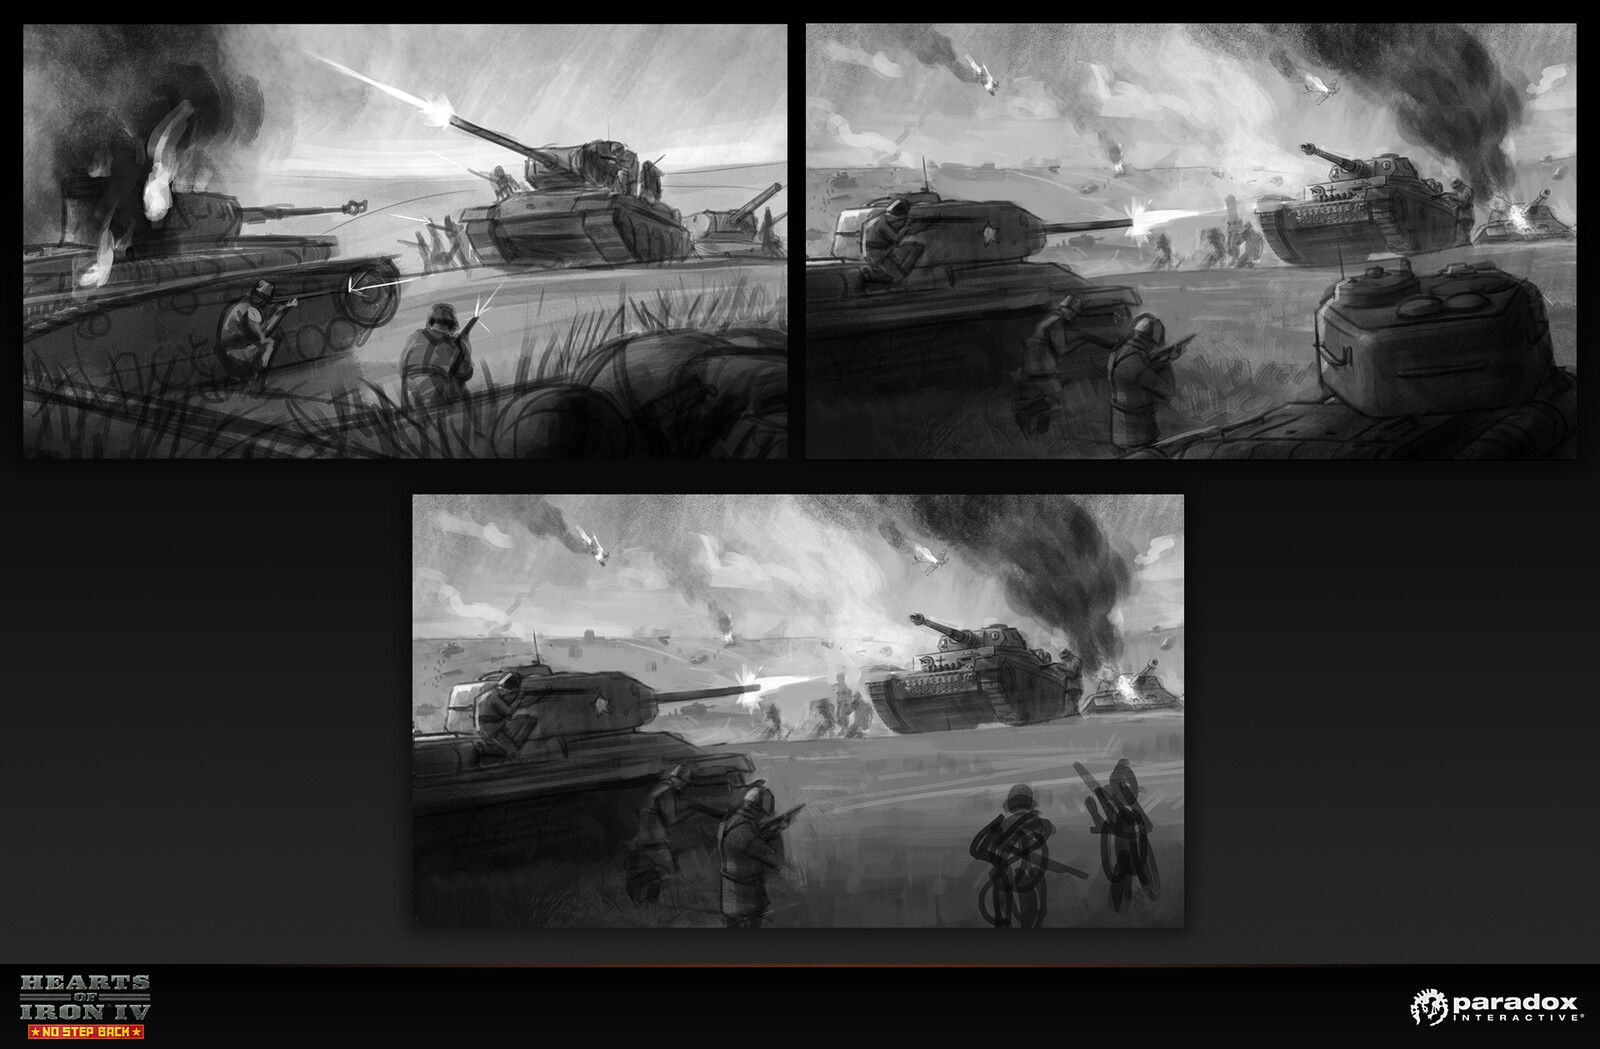 The developments of the sketch to reach the final composition.